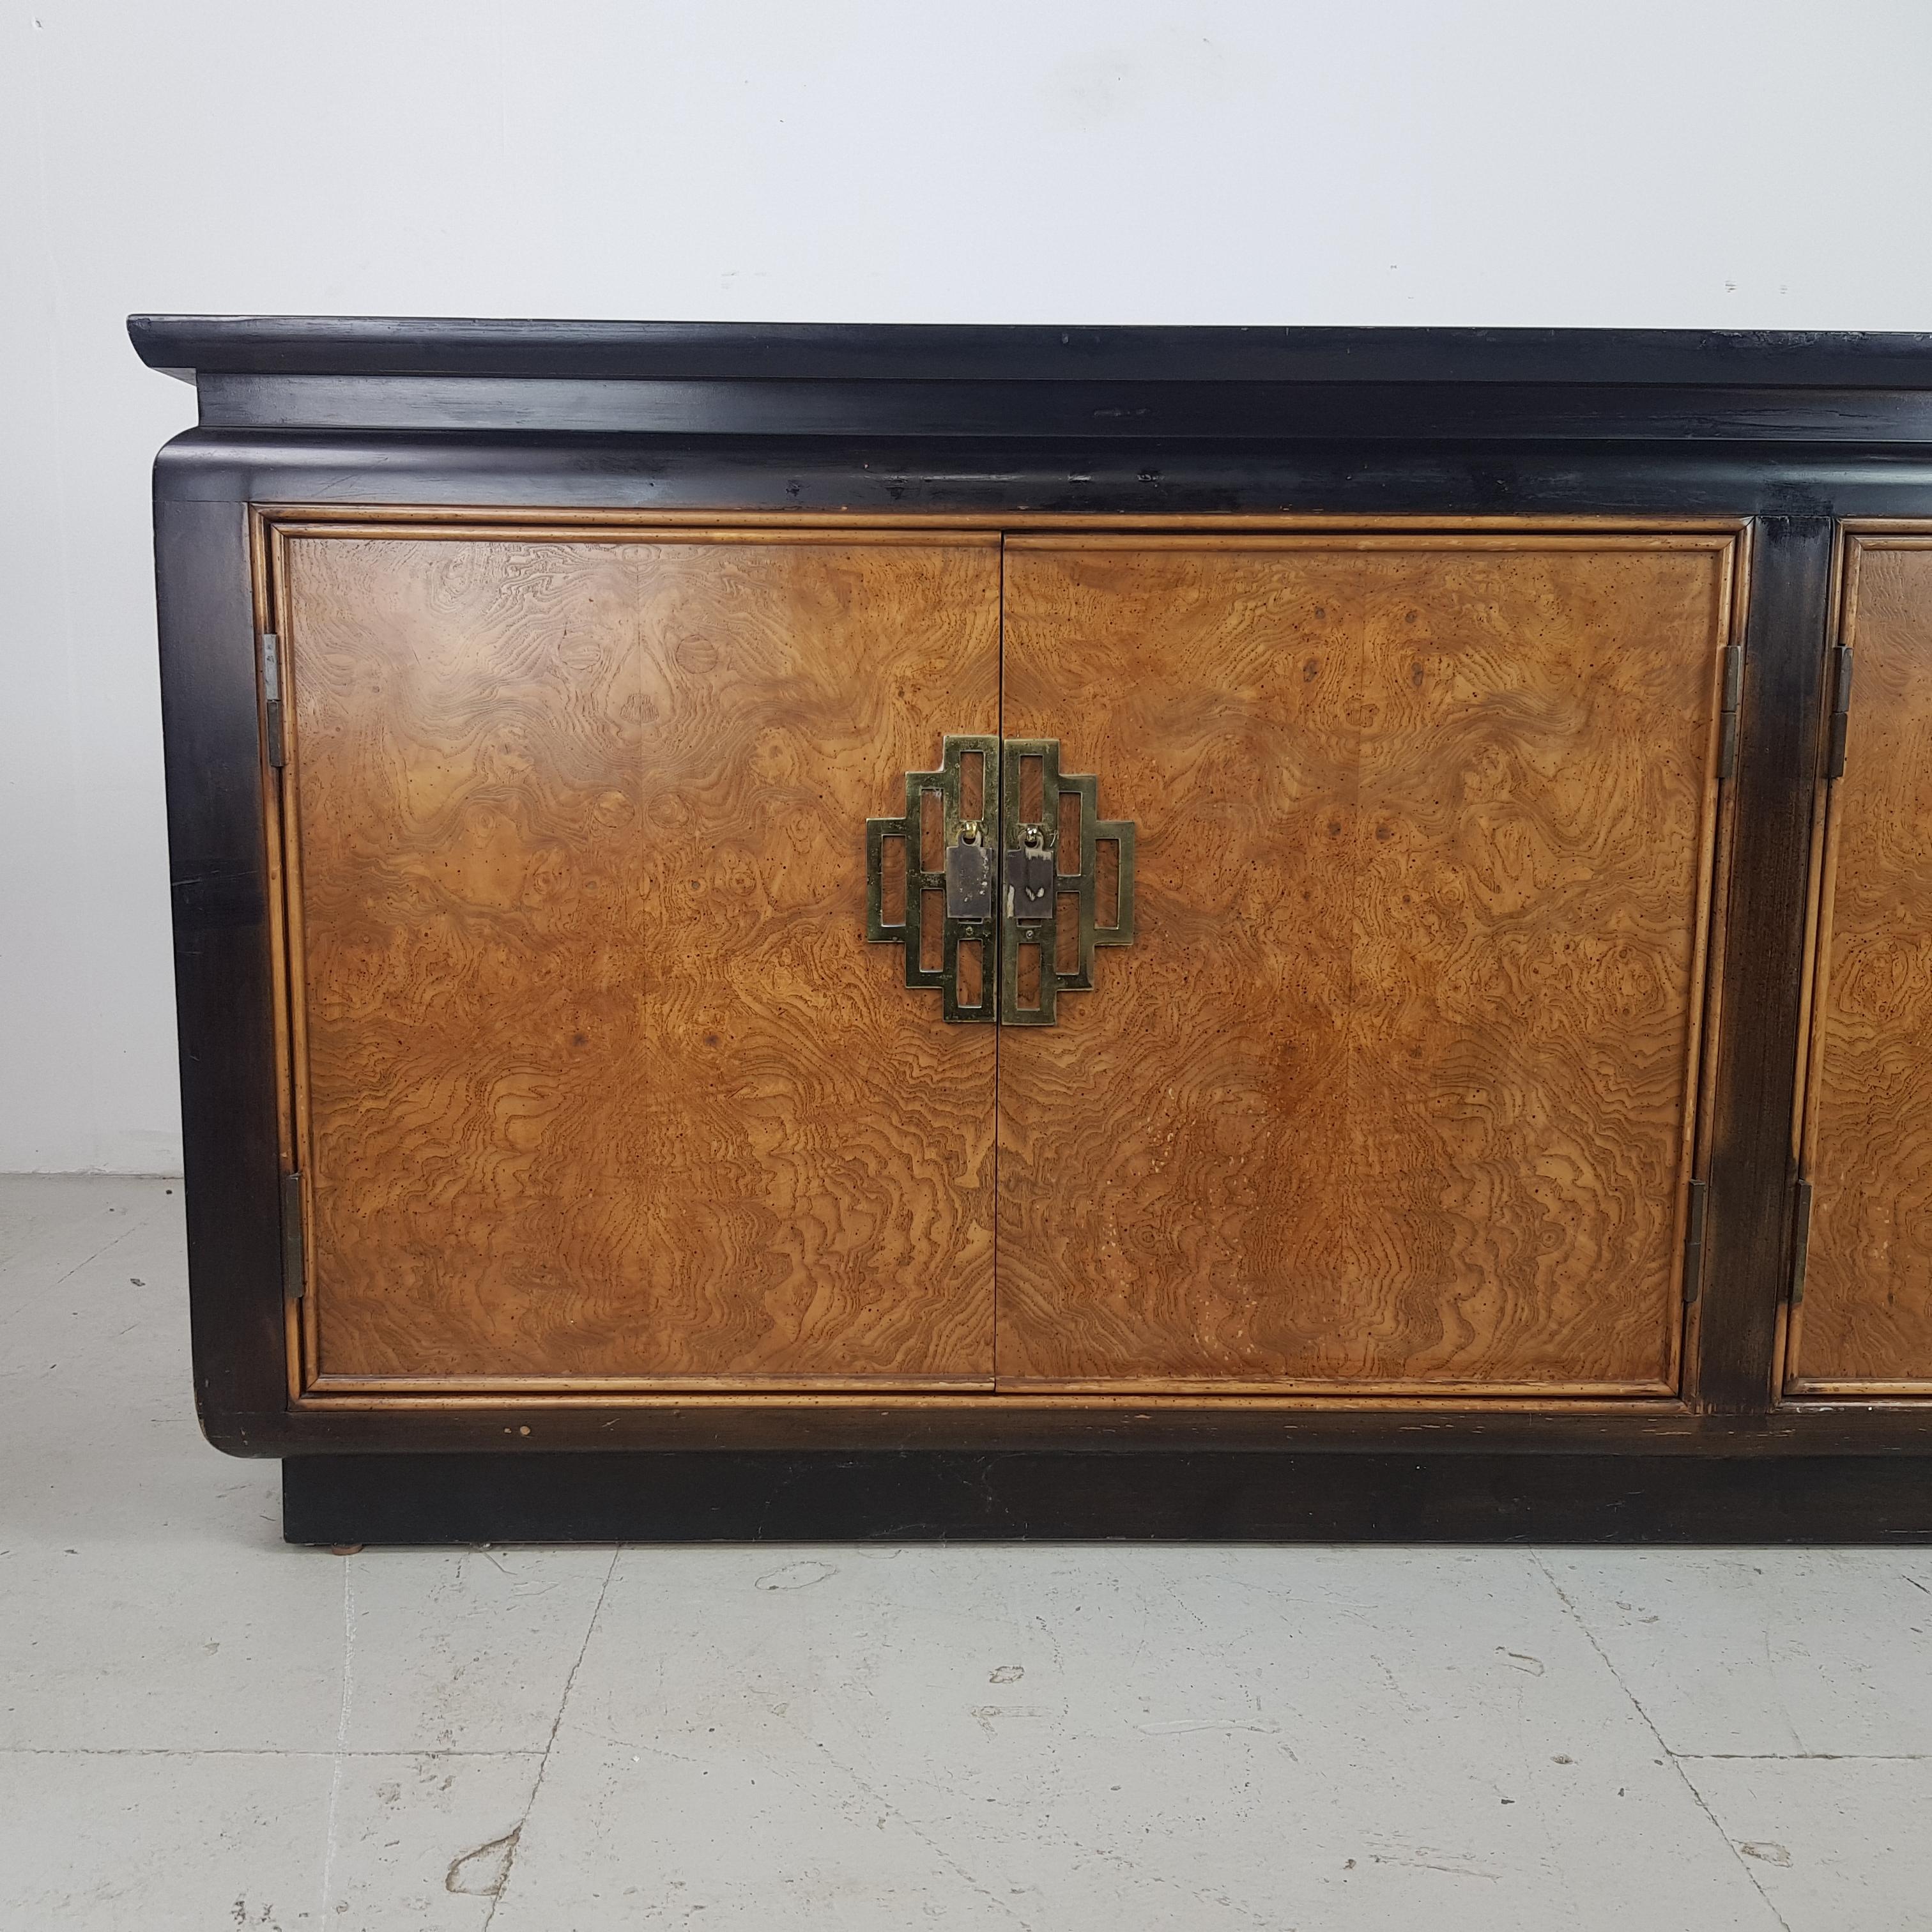 1970s Hollywood Regency Century Furniture Black Lacquer and Burl Wood Sideboard For Sale 1